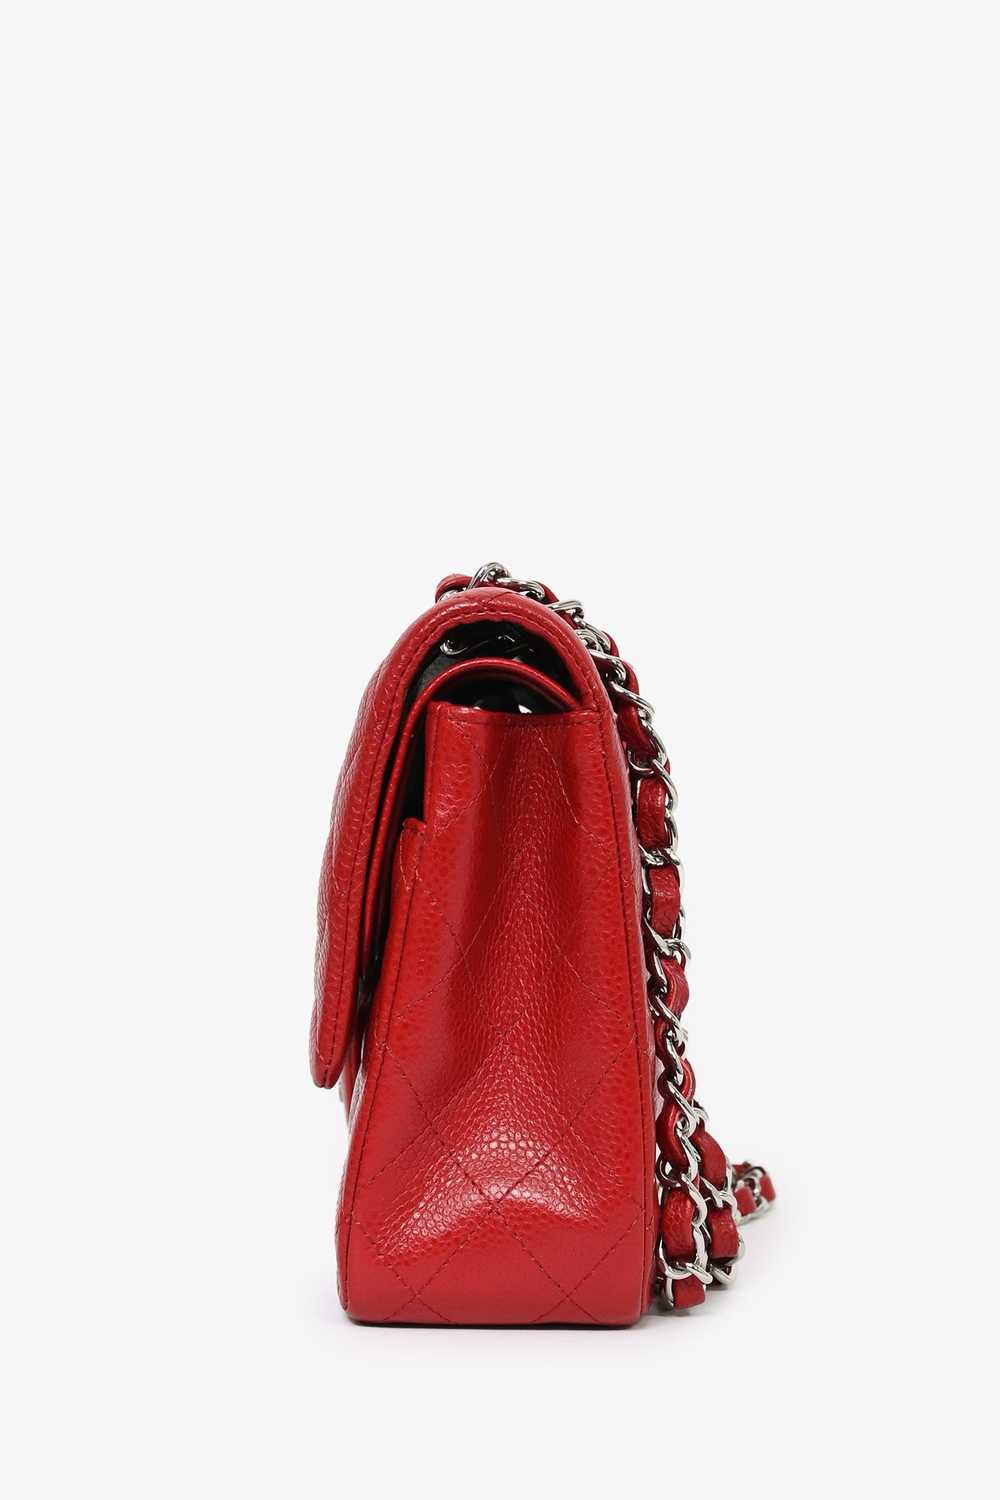 Pre-loved Chanel™ 2011 Red Caviar Leather Medium … - image 6